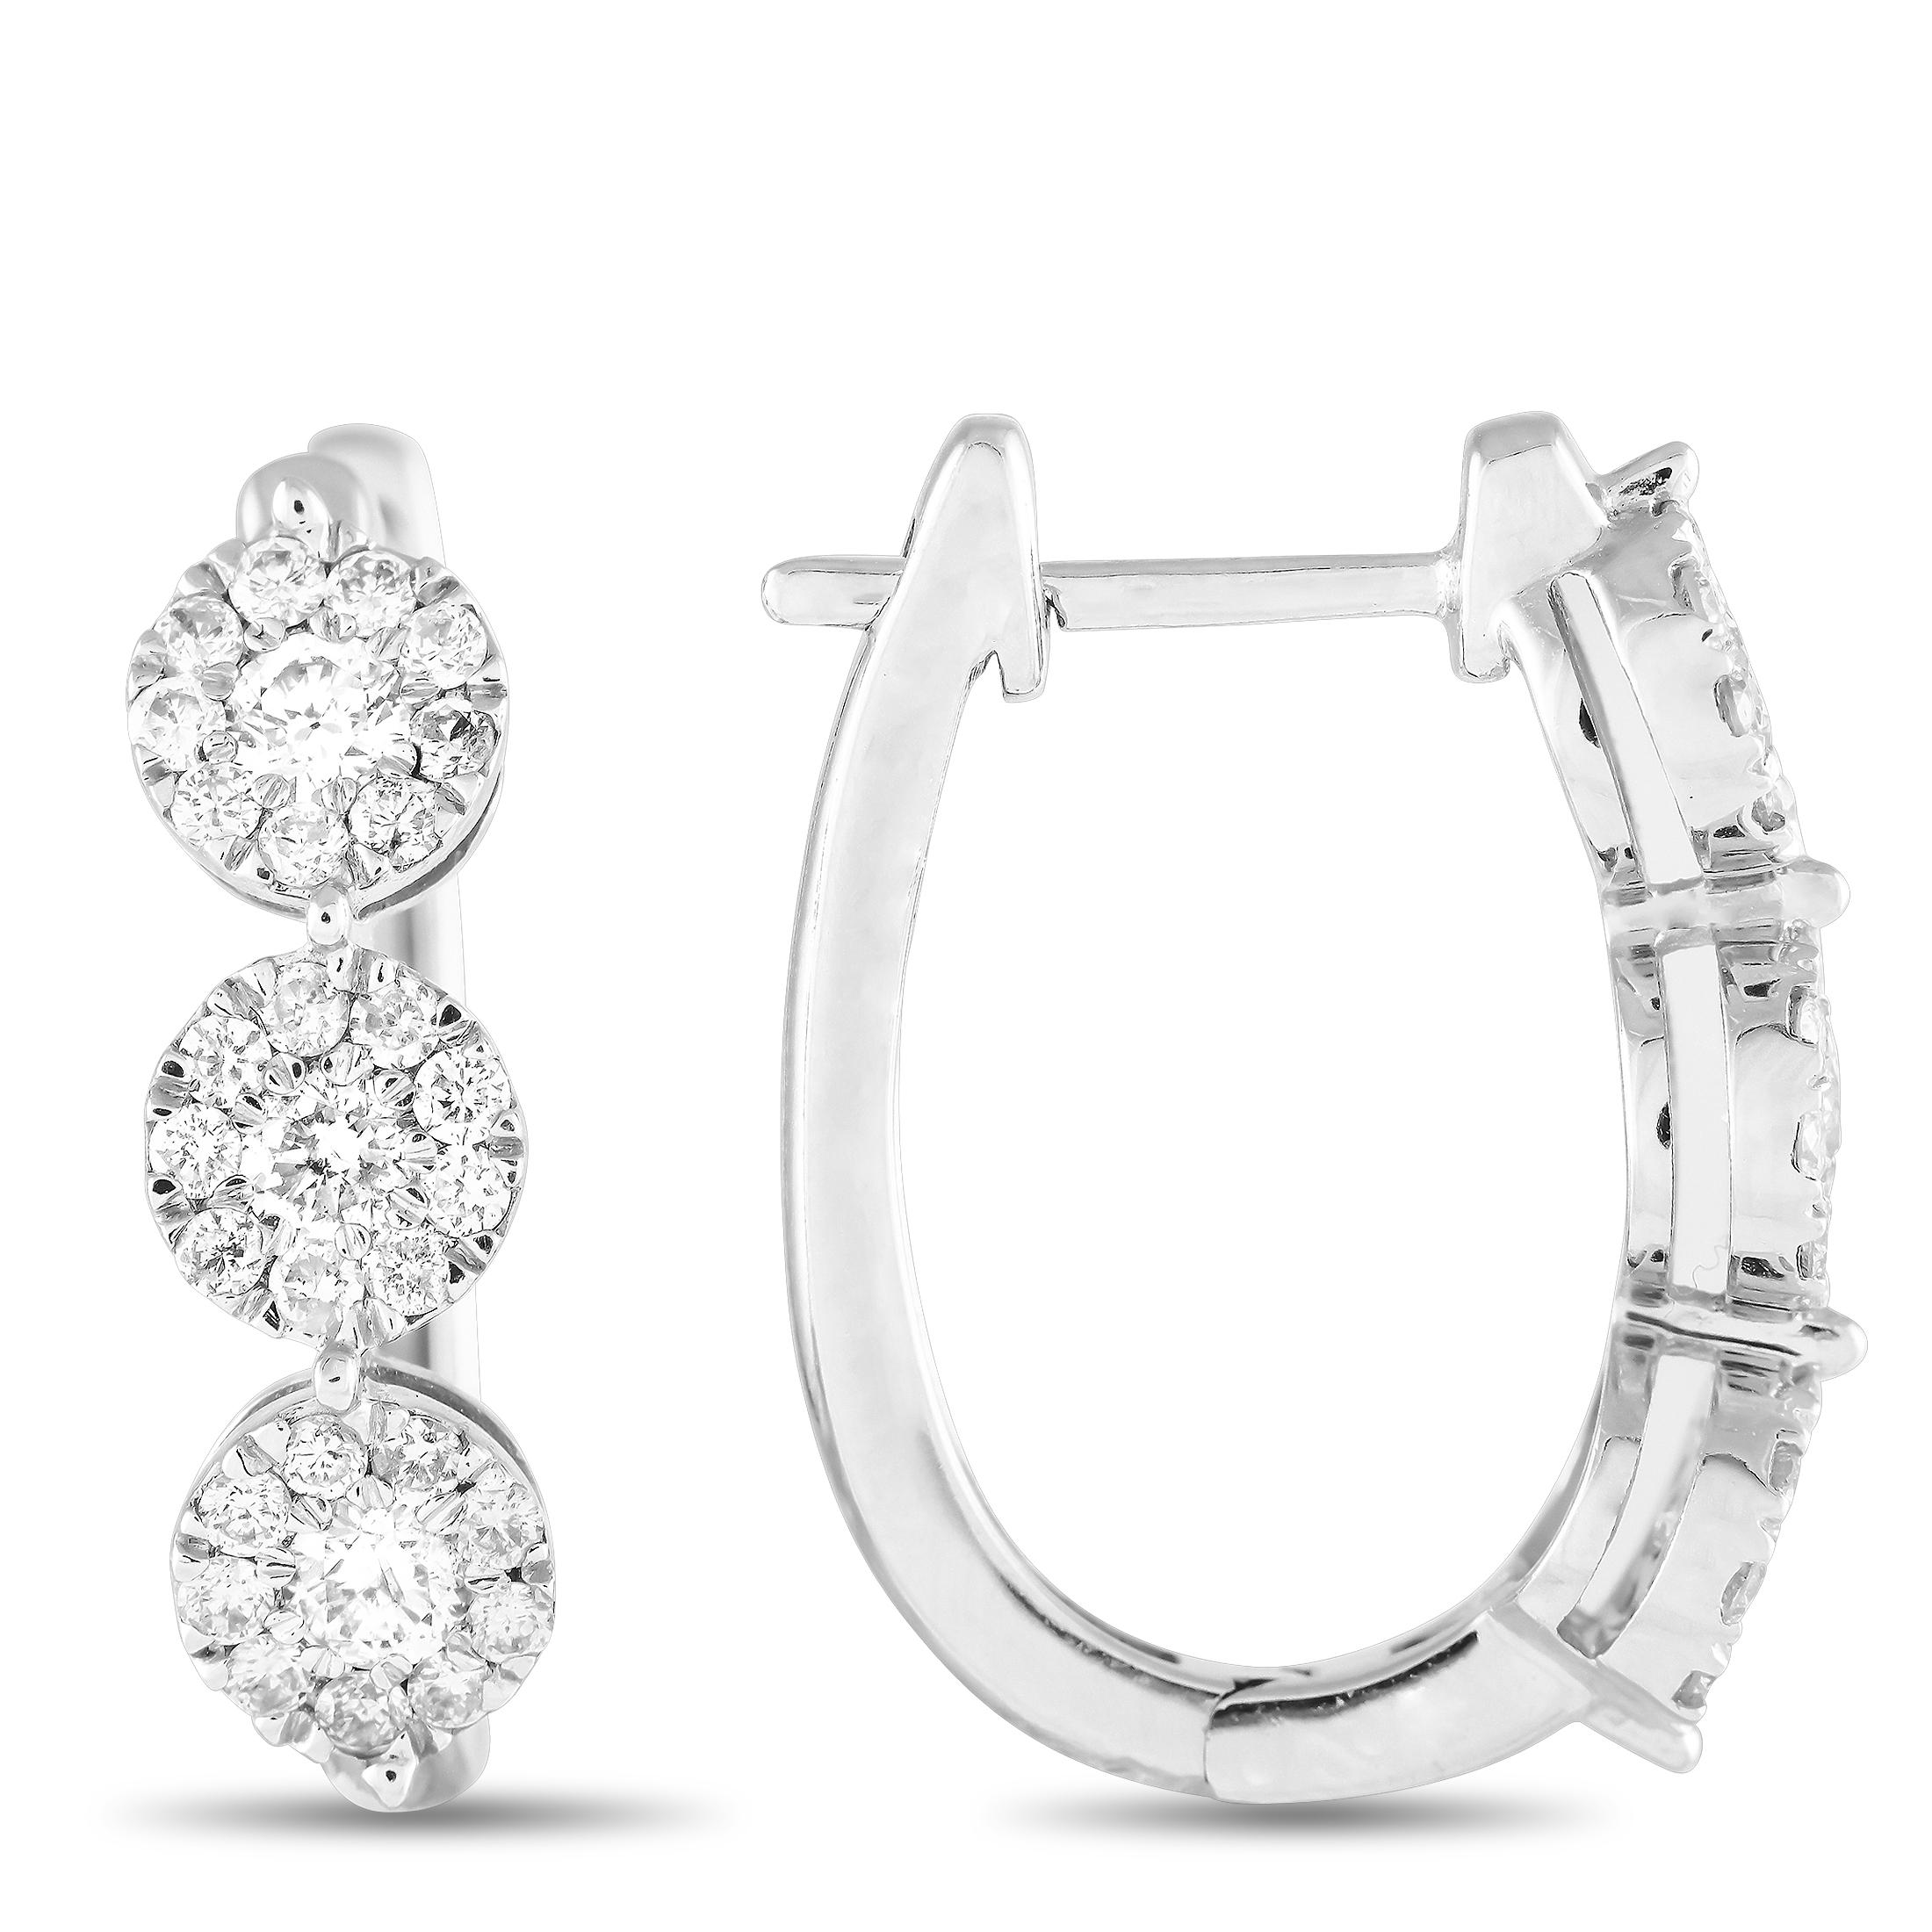 Sparkling Diamonds with a total weight of 1.0 carats allow these exquisitely crafted earrings to effortlessly catch the light. Crafted from 14K White Gold, each one features a curved setting that measures 0.75 long by 0.66 wide.This jewelry piece is